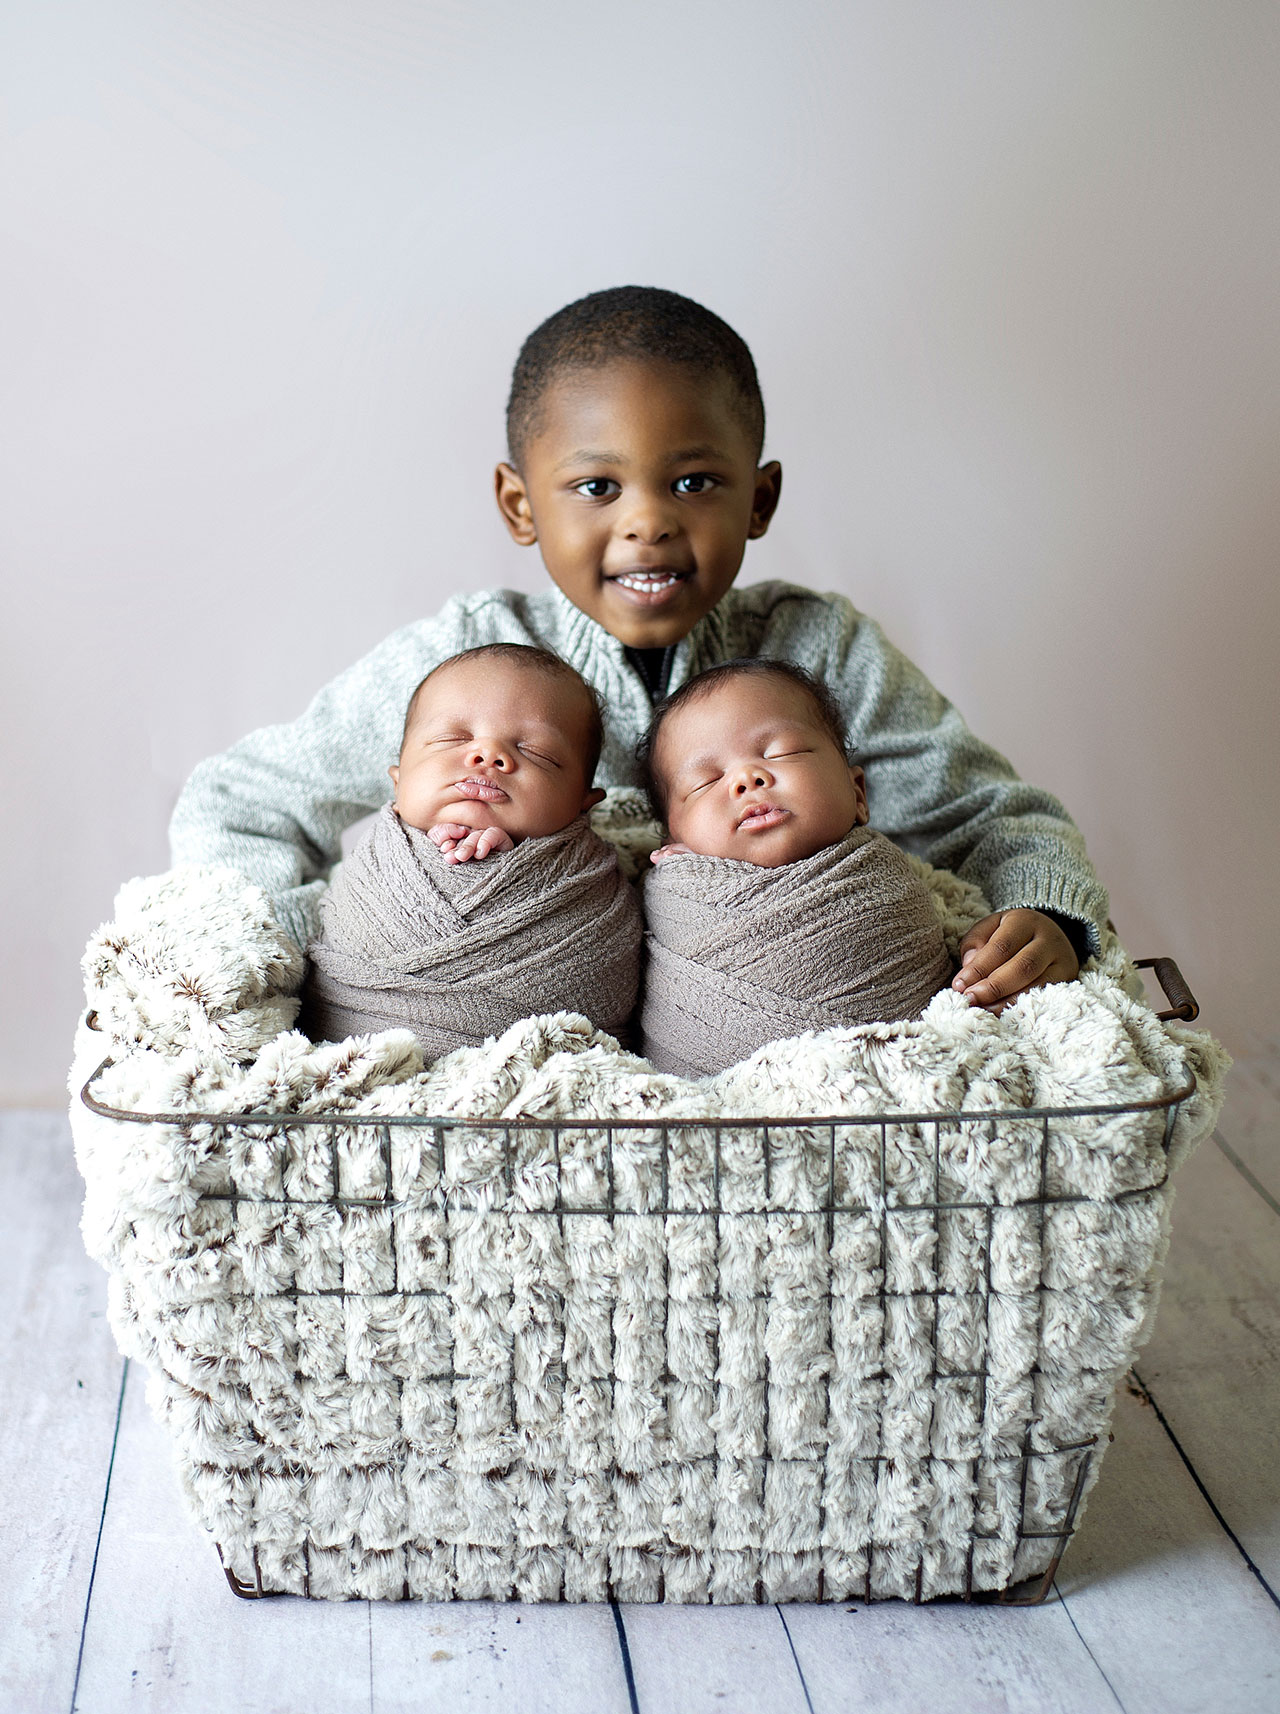 precious twin session with their older brother holding them, by maryland photographer, Angela Singleton  